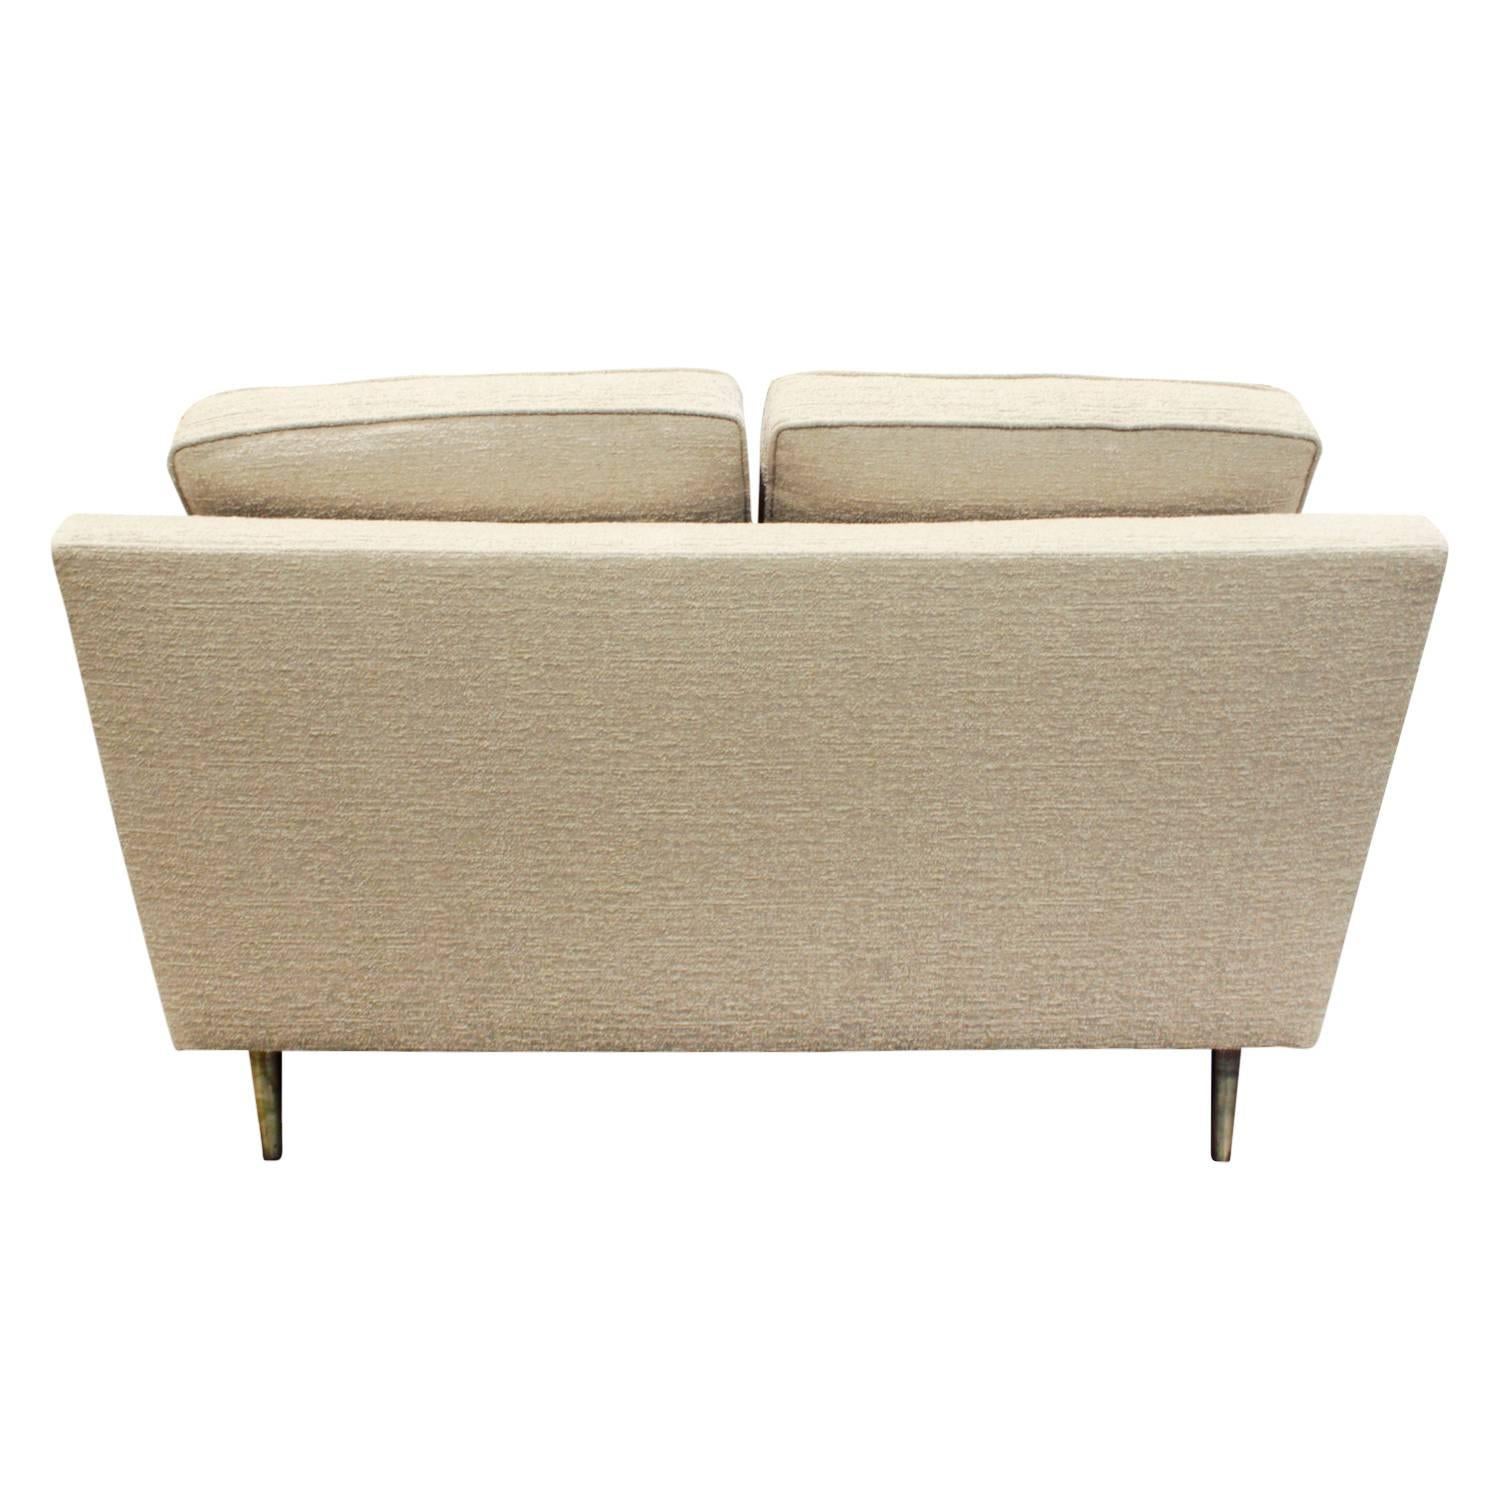 Hand-Crafted Edward Wormley Pair of Rare Settees with Conical Brass Legs, 1948